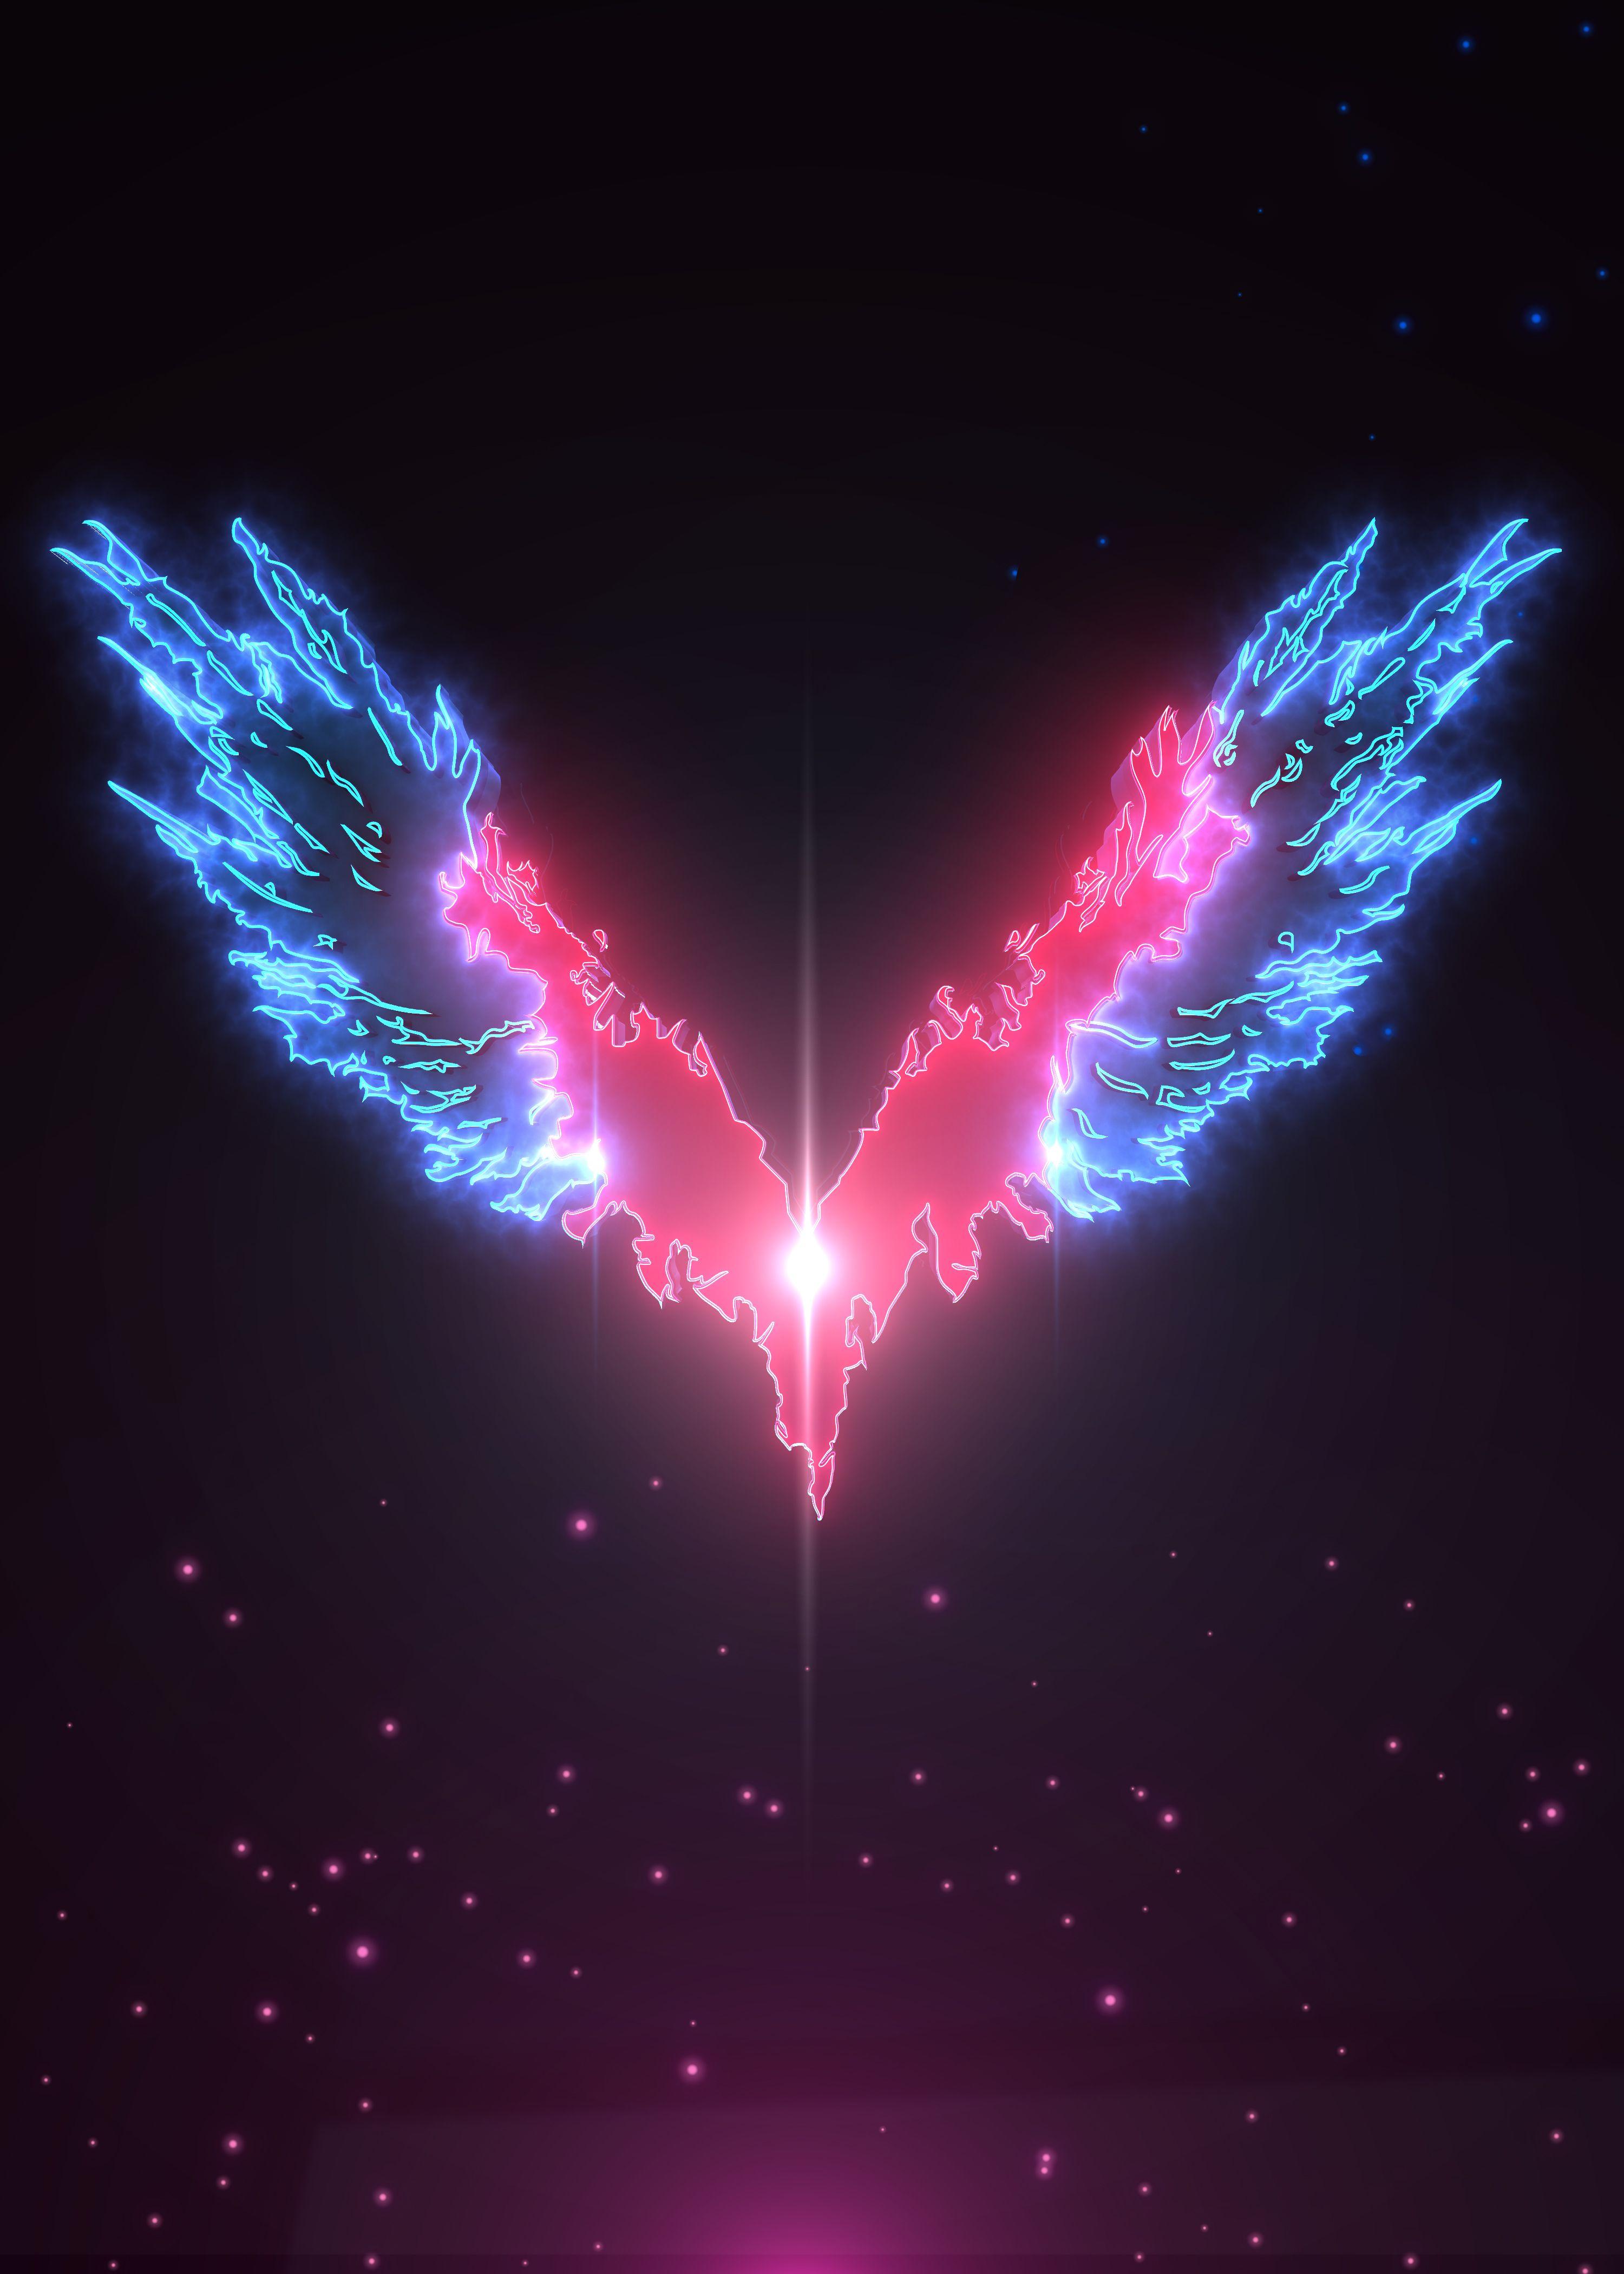 v devil may cry 5 icons